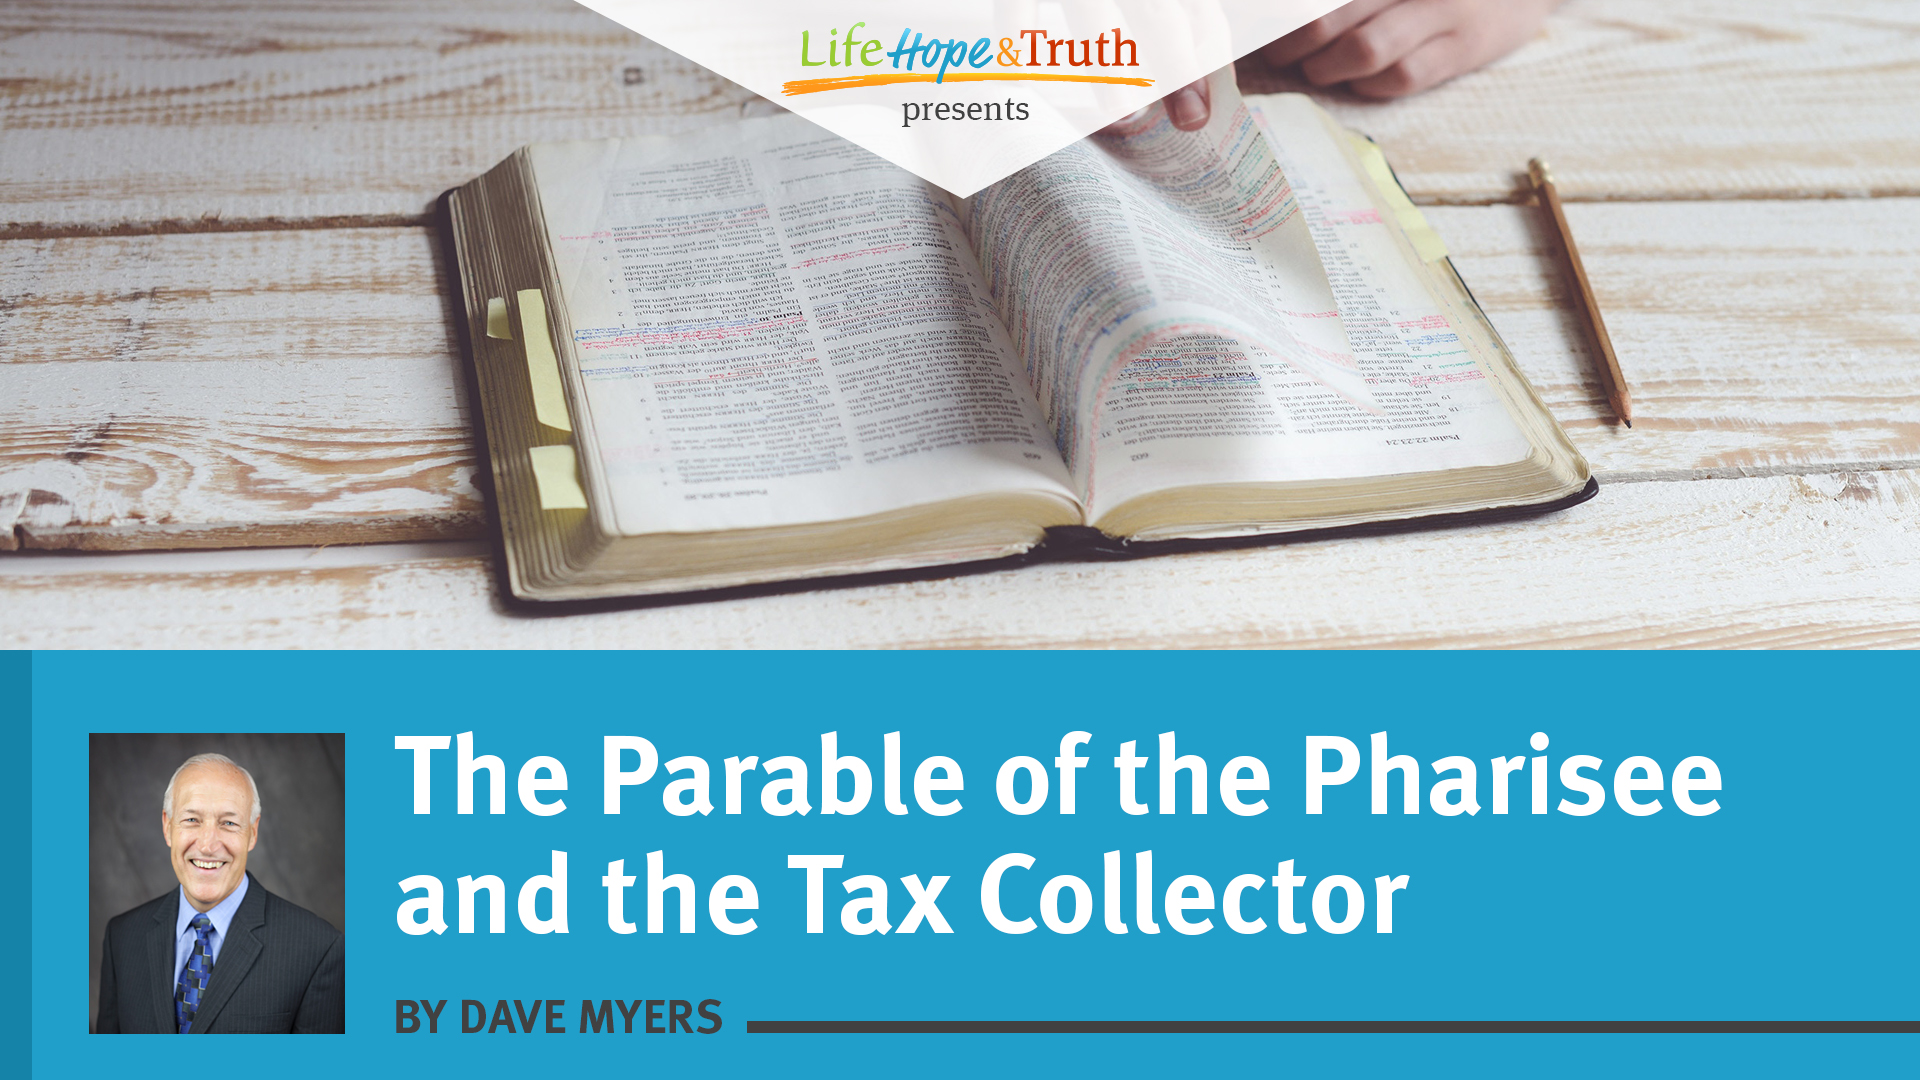 The Parable of the Pharisee and the Tax Collector